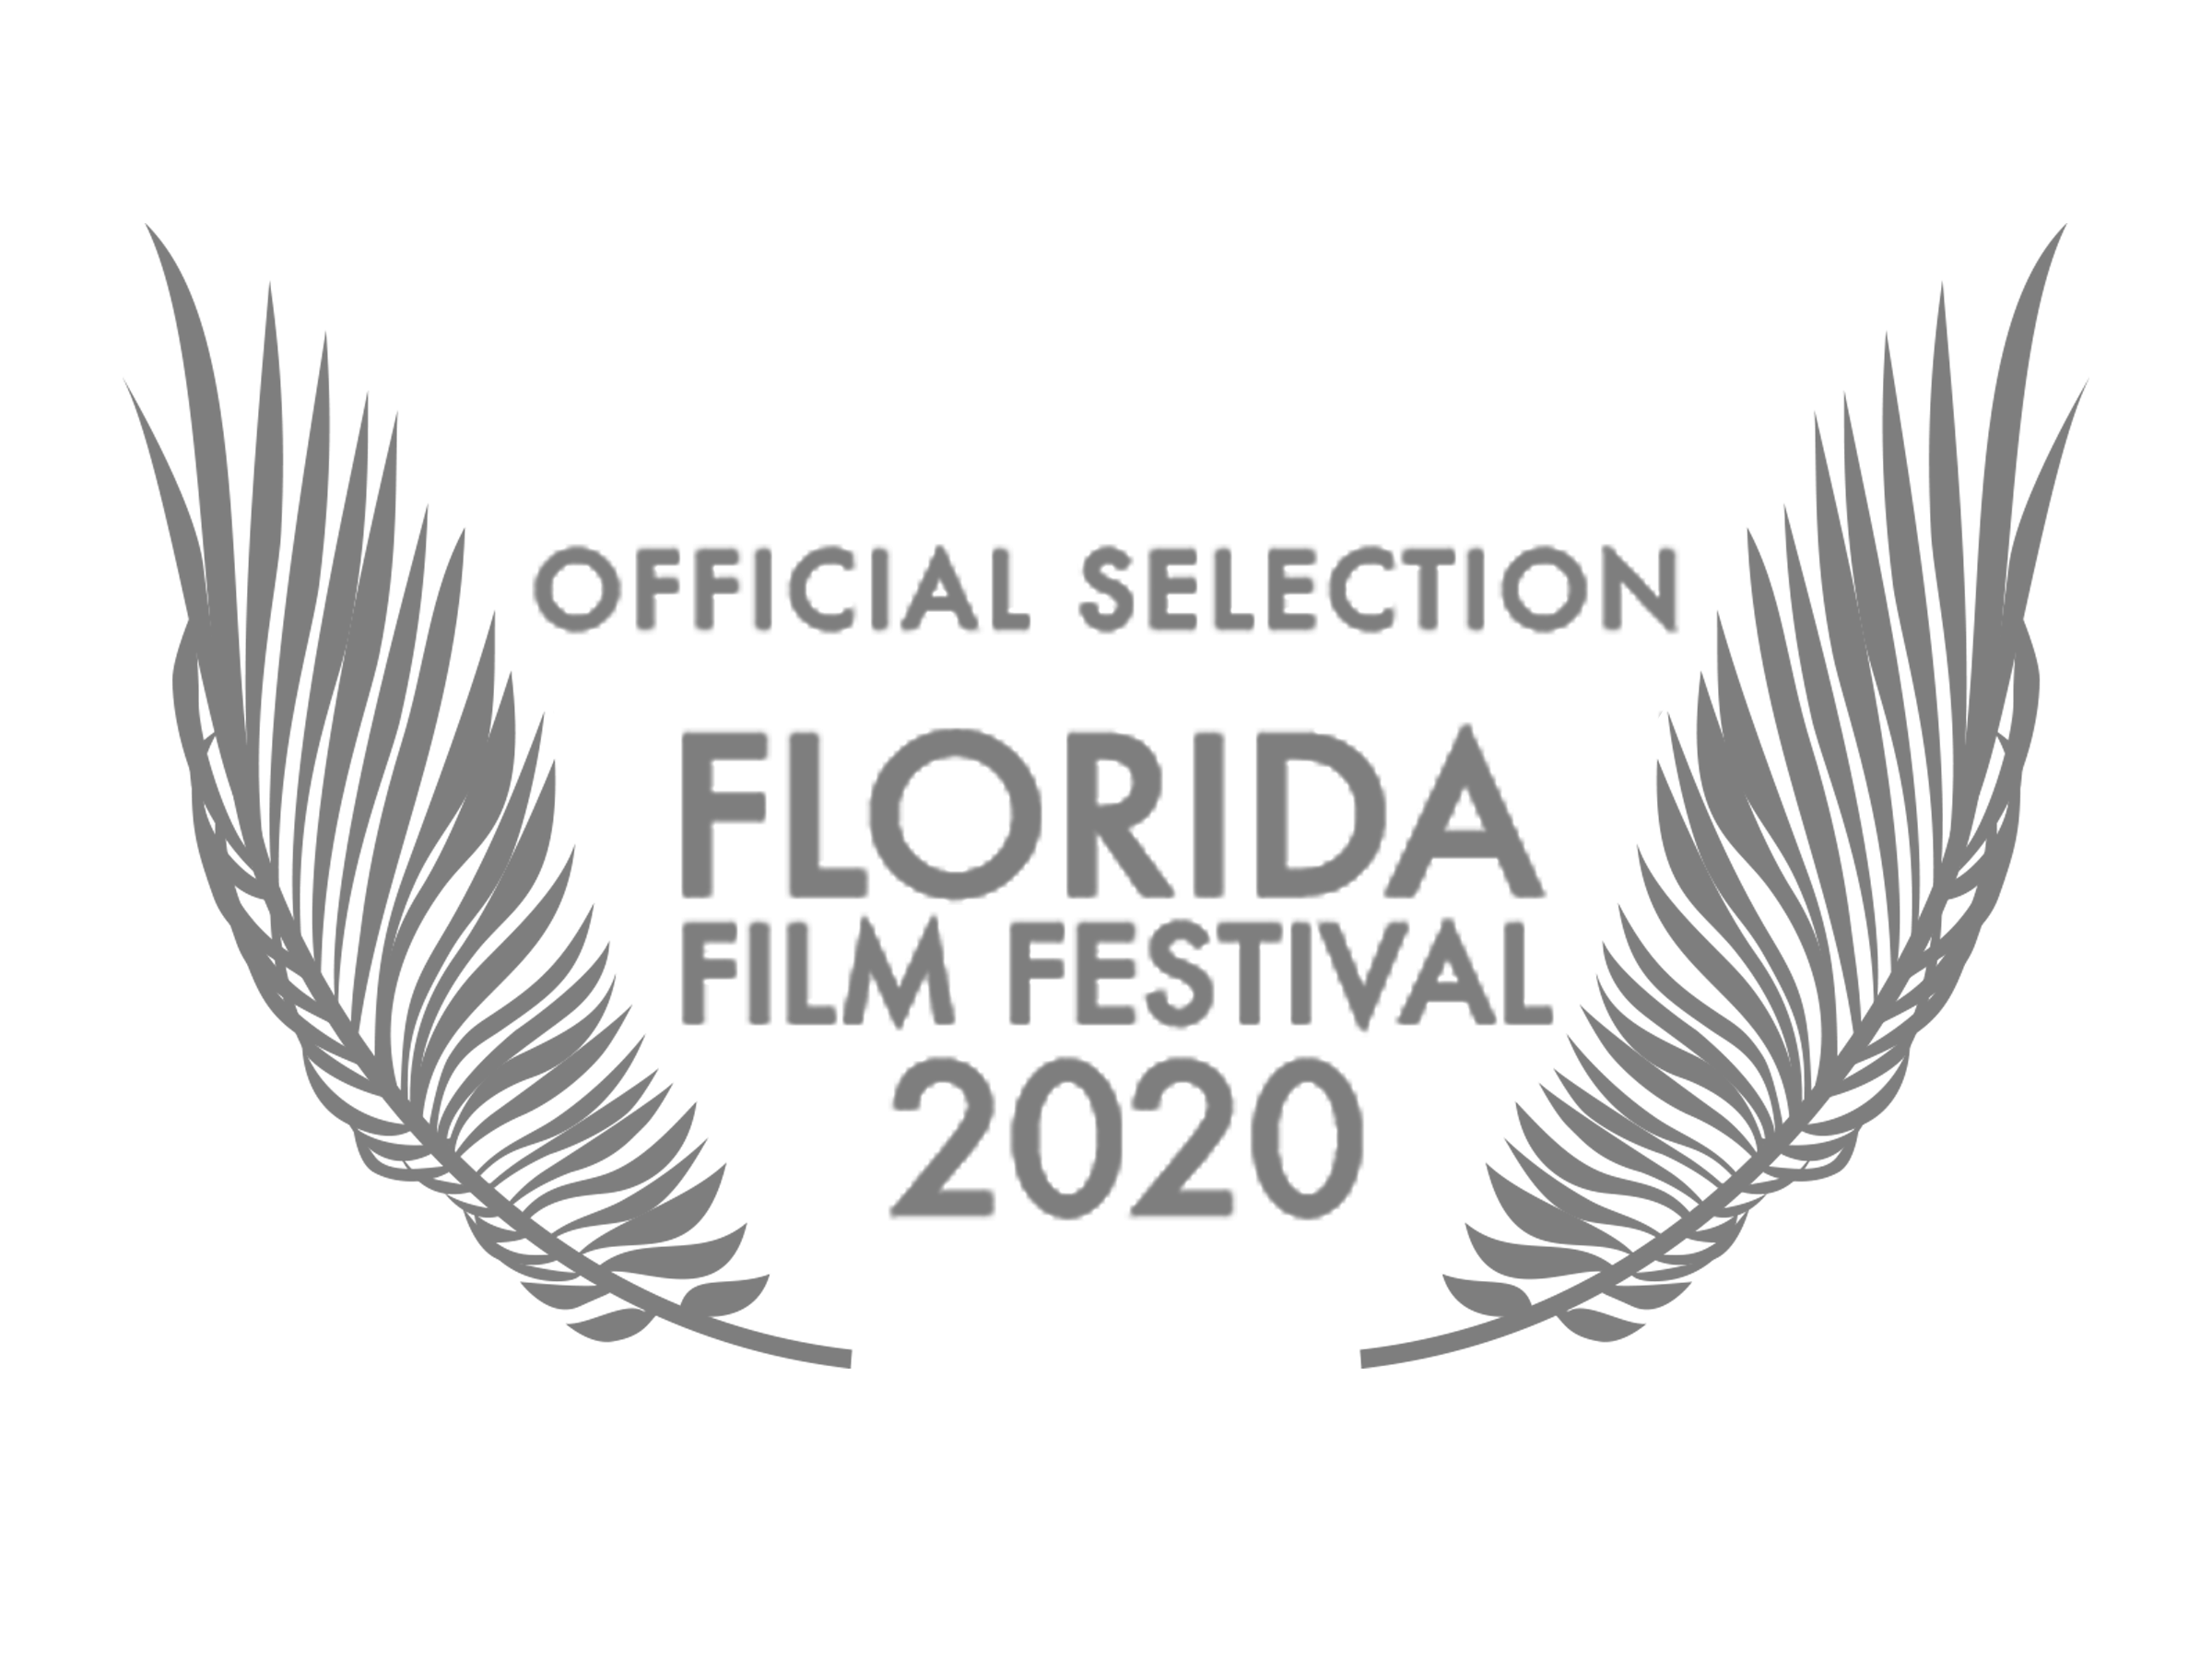 FloridaFilmFestival_OfficialSelection.png